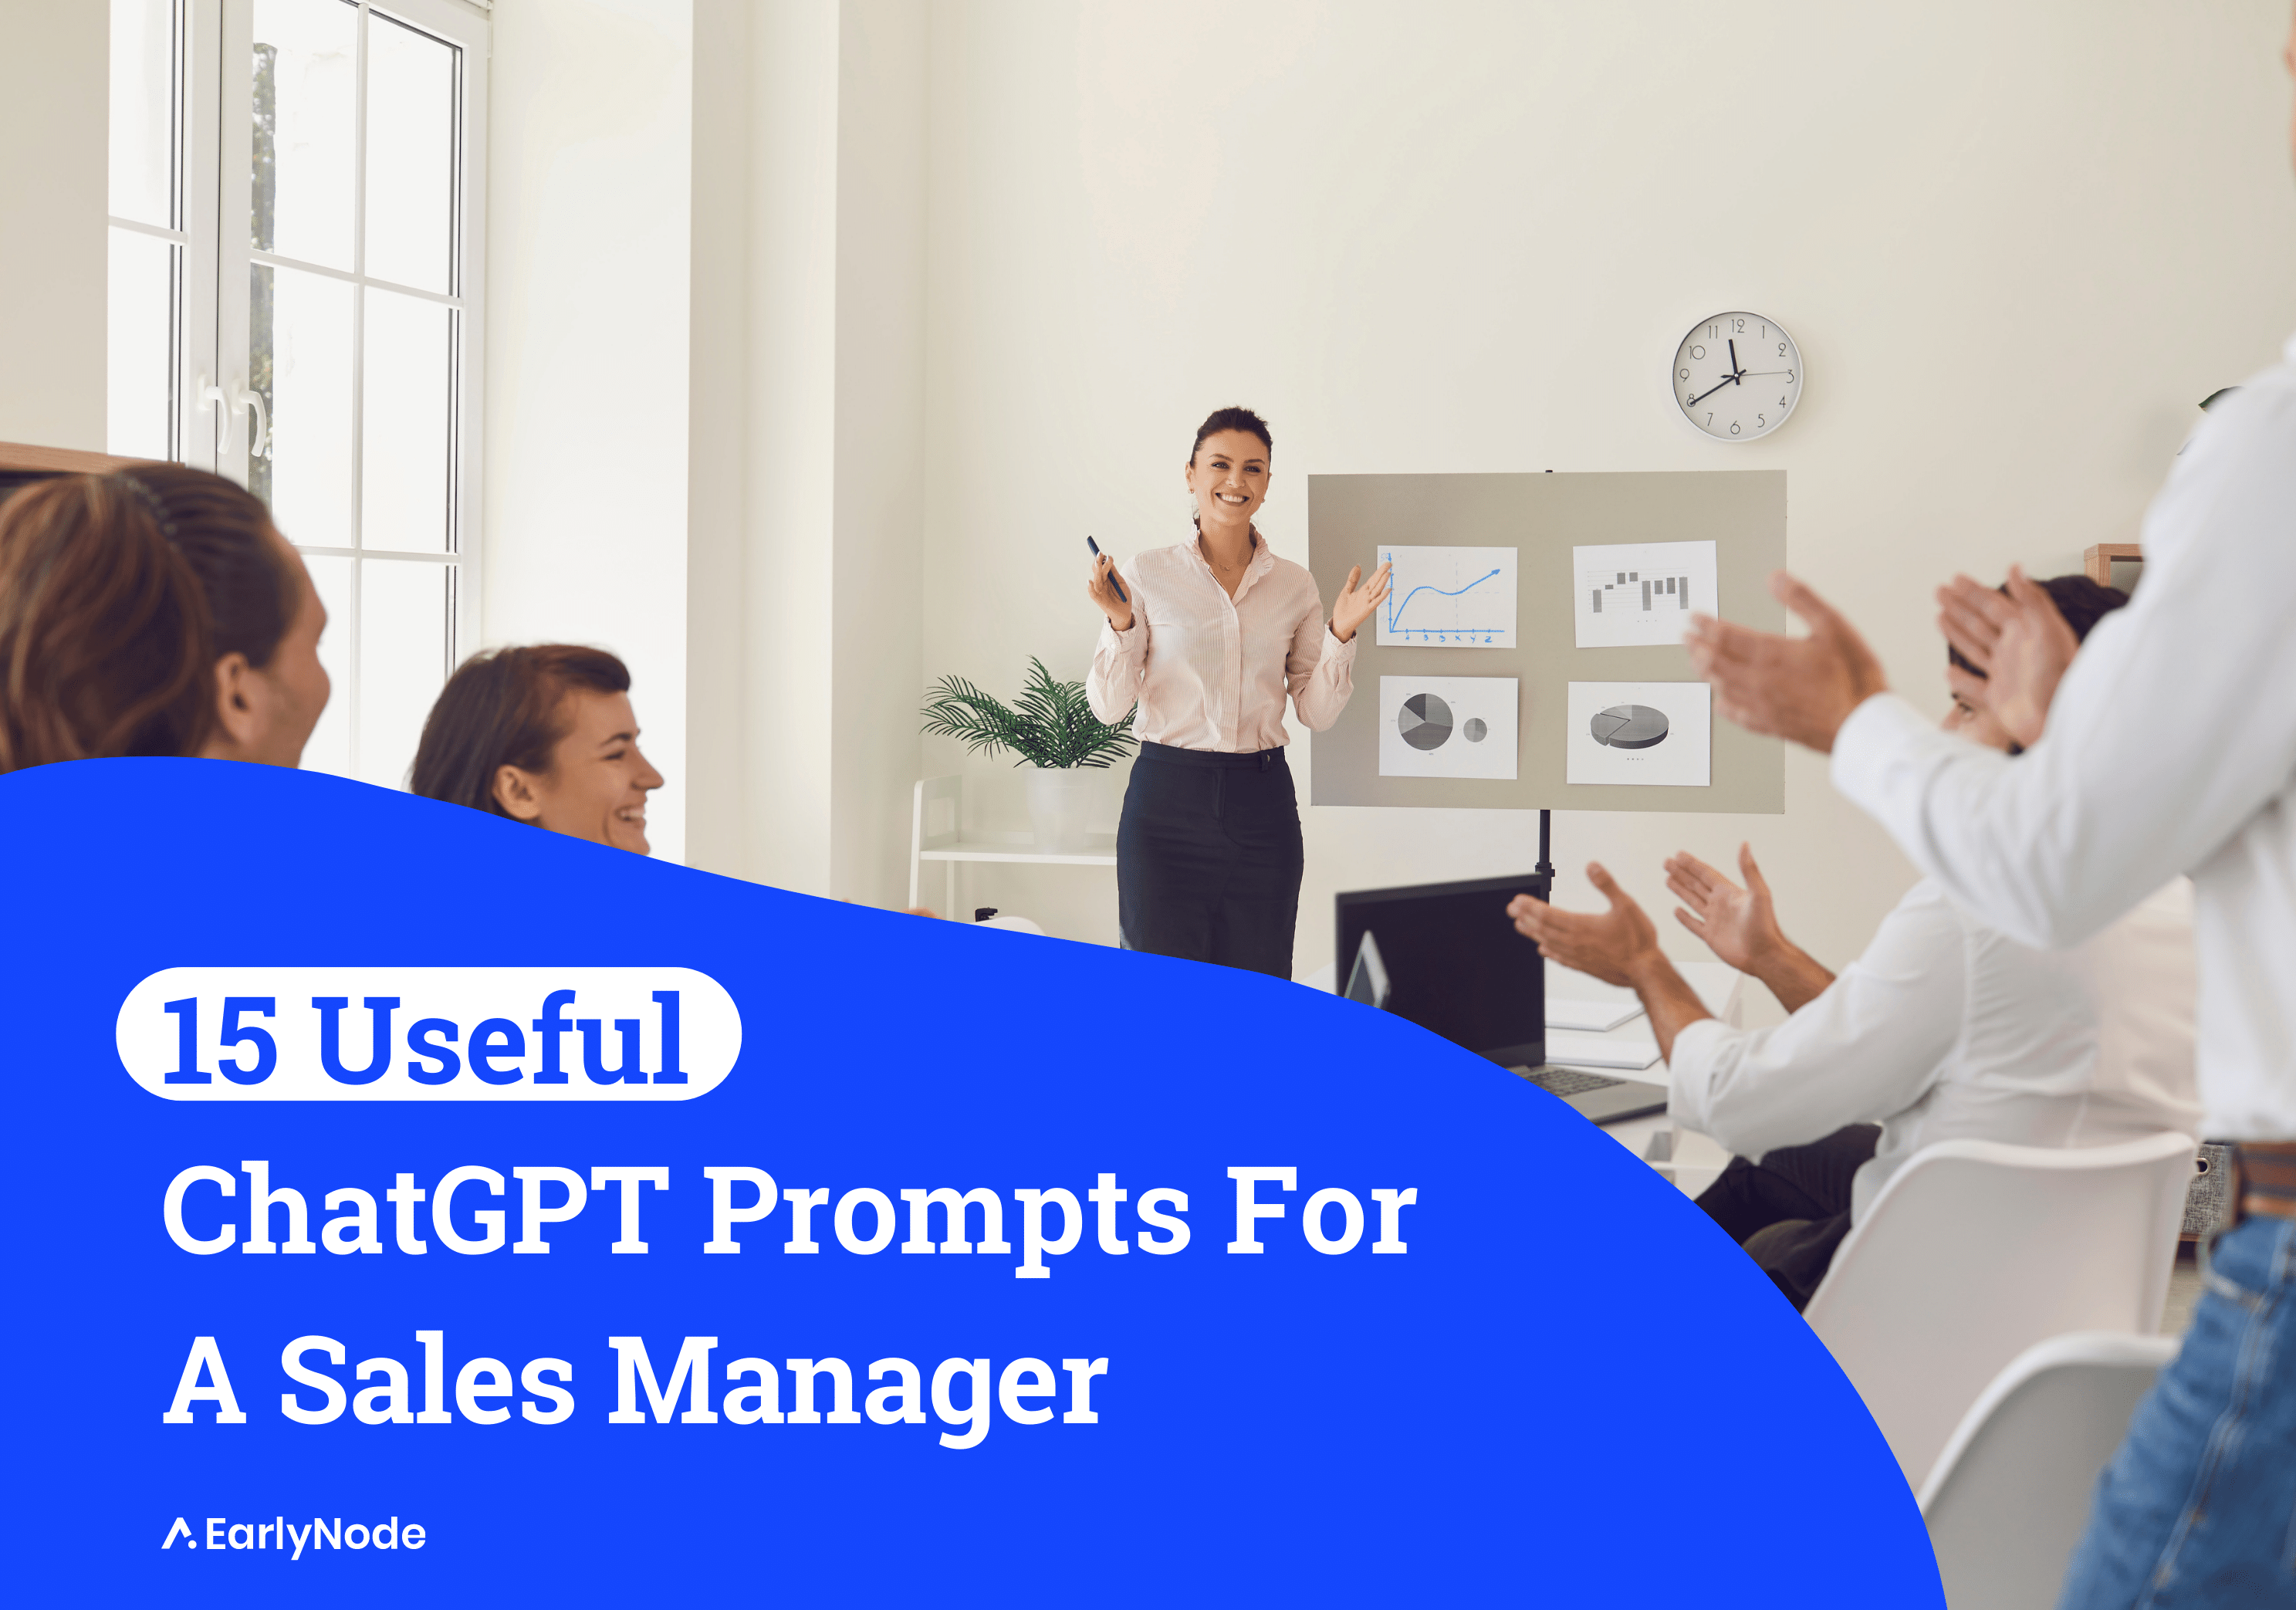 15 Useful ChatGPT Prompts for Sales Managers